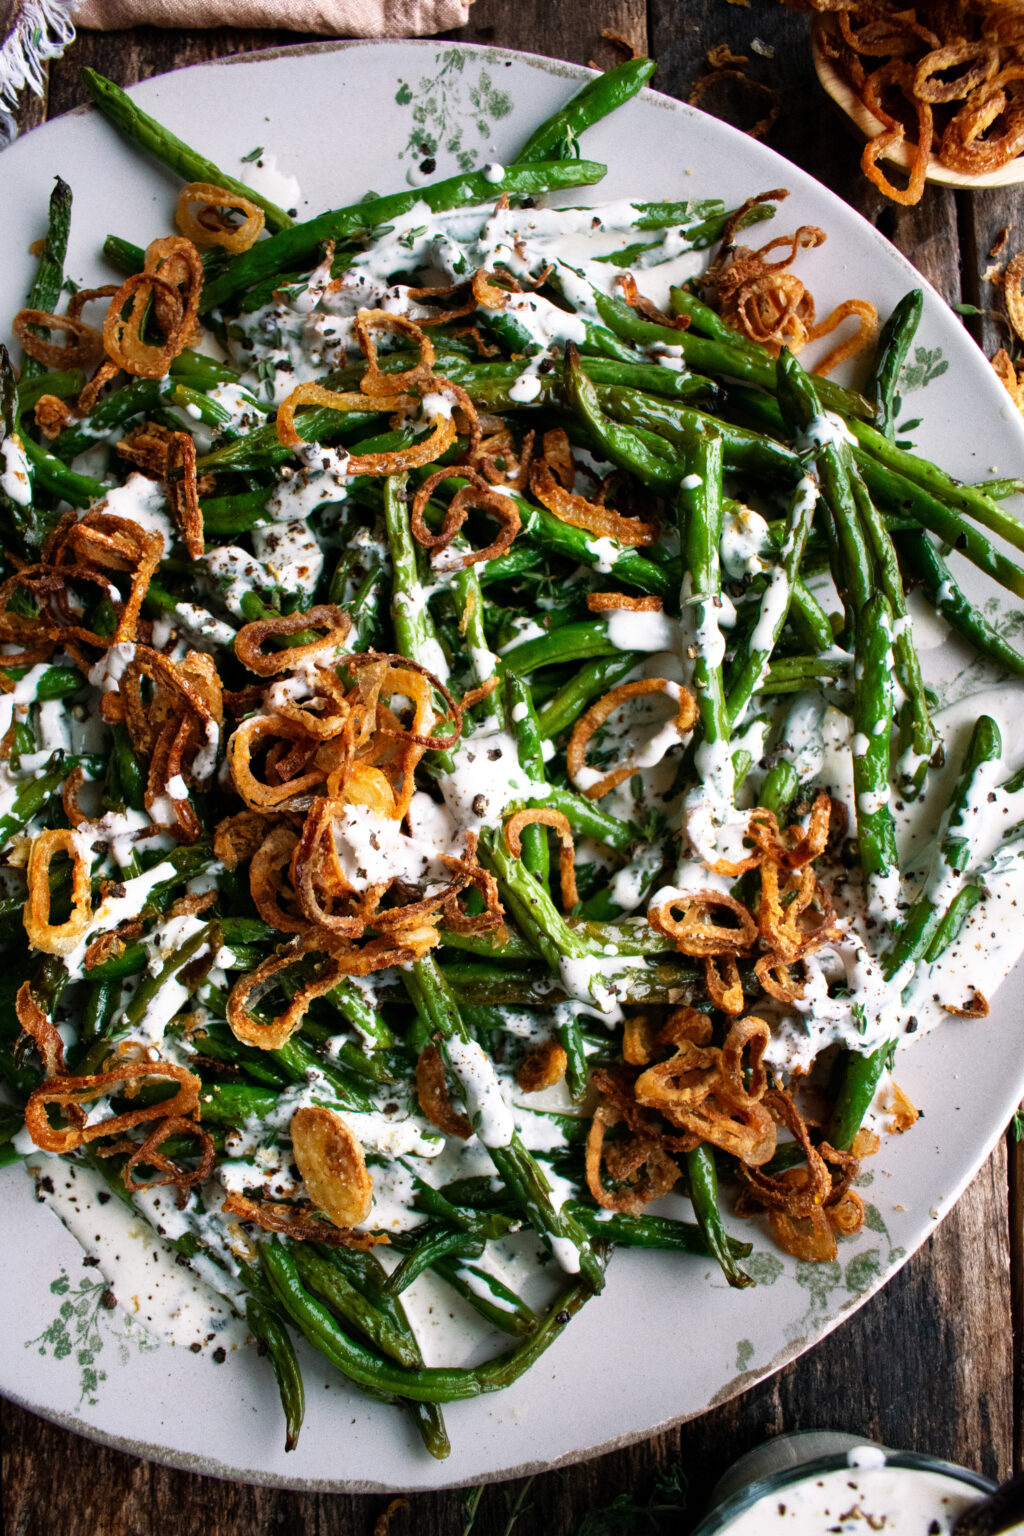 Roasted Green Beans with Buttermilk Dressing - The Original Dish